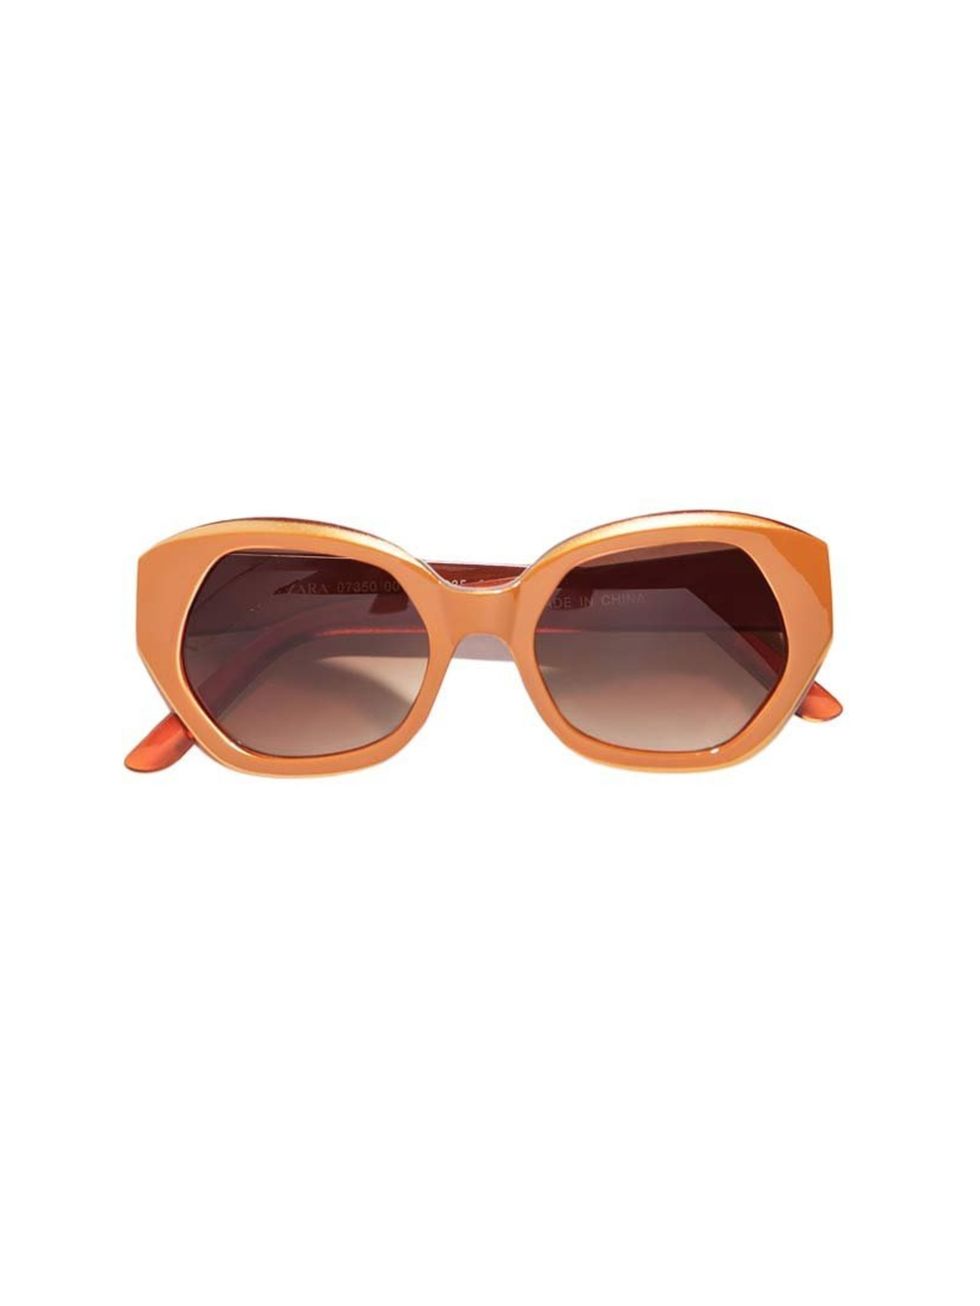 <p>Want to introduce colour into your wardrobe? Start small - these peachy shades will make a convert of you.</p><p><a href="http://www.zara.com/uk/en/new-this-week/woman/-c363008p1818543.html">Zara</a> sunglasses, £19.99</p>